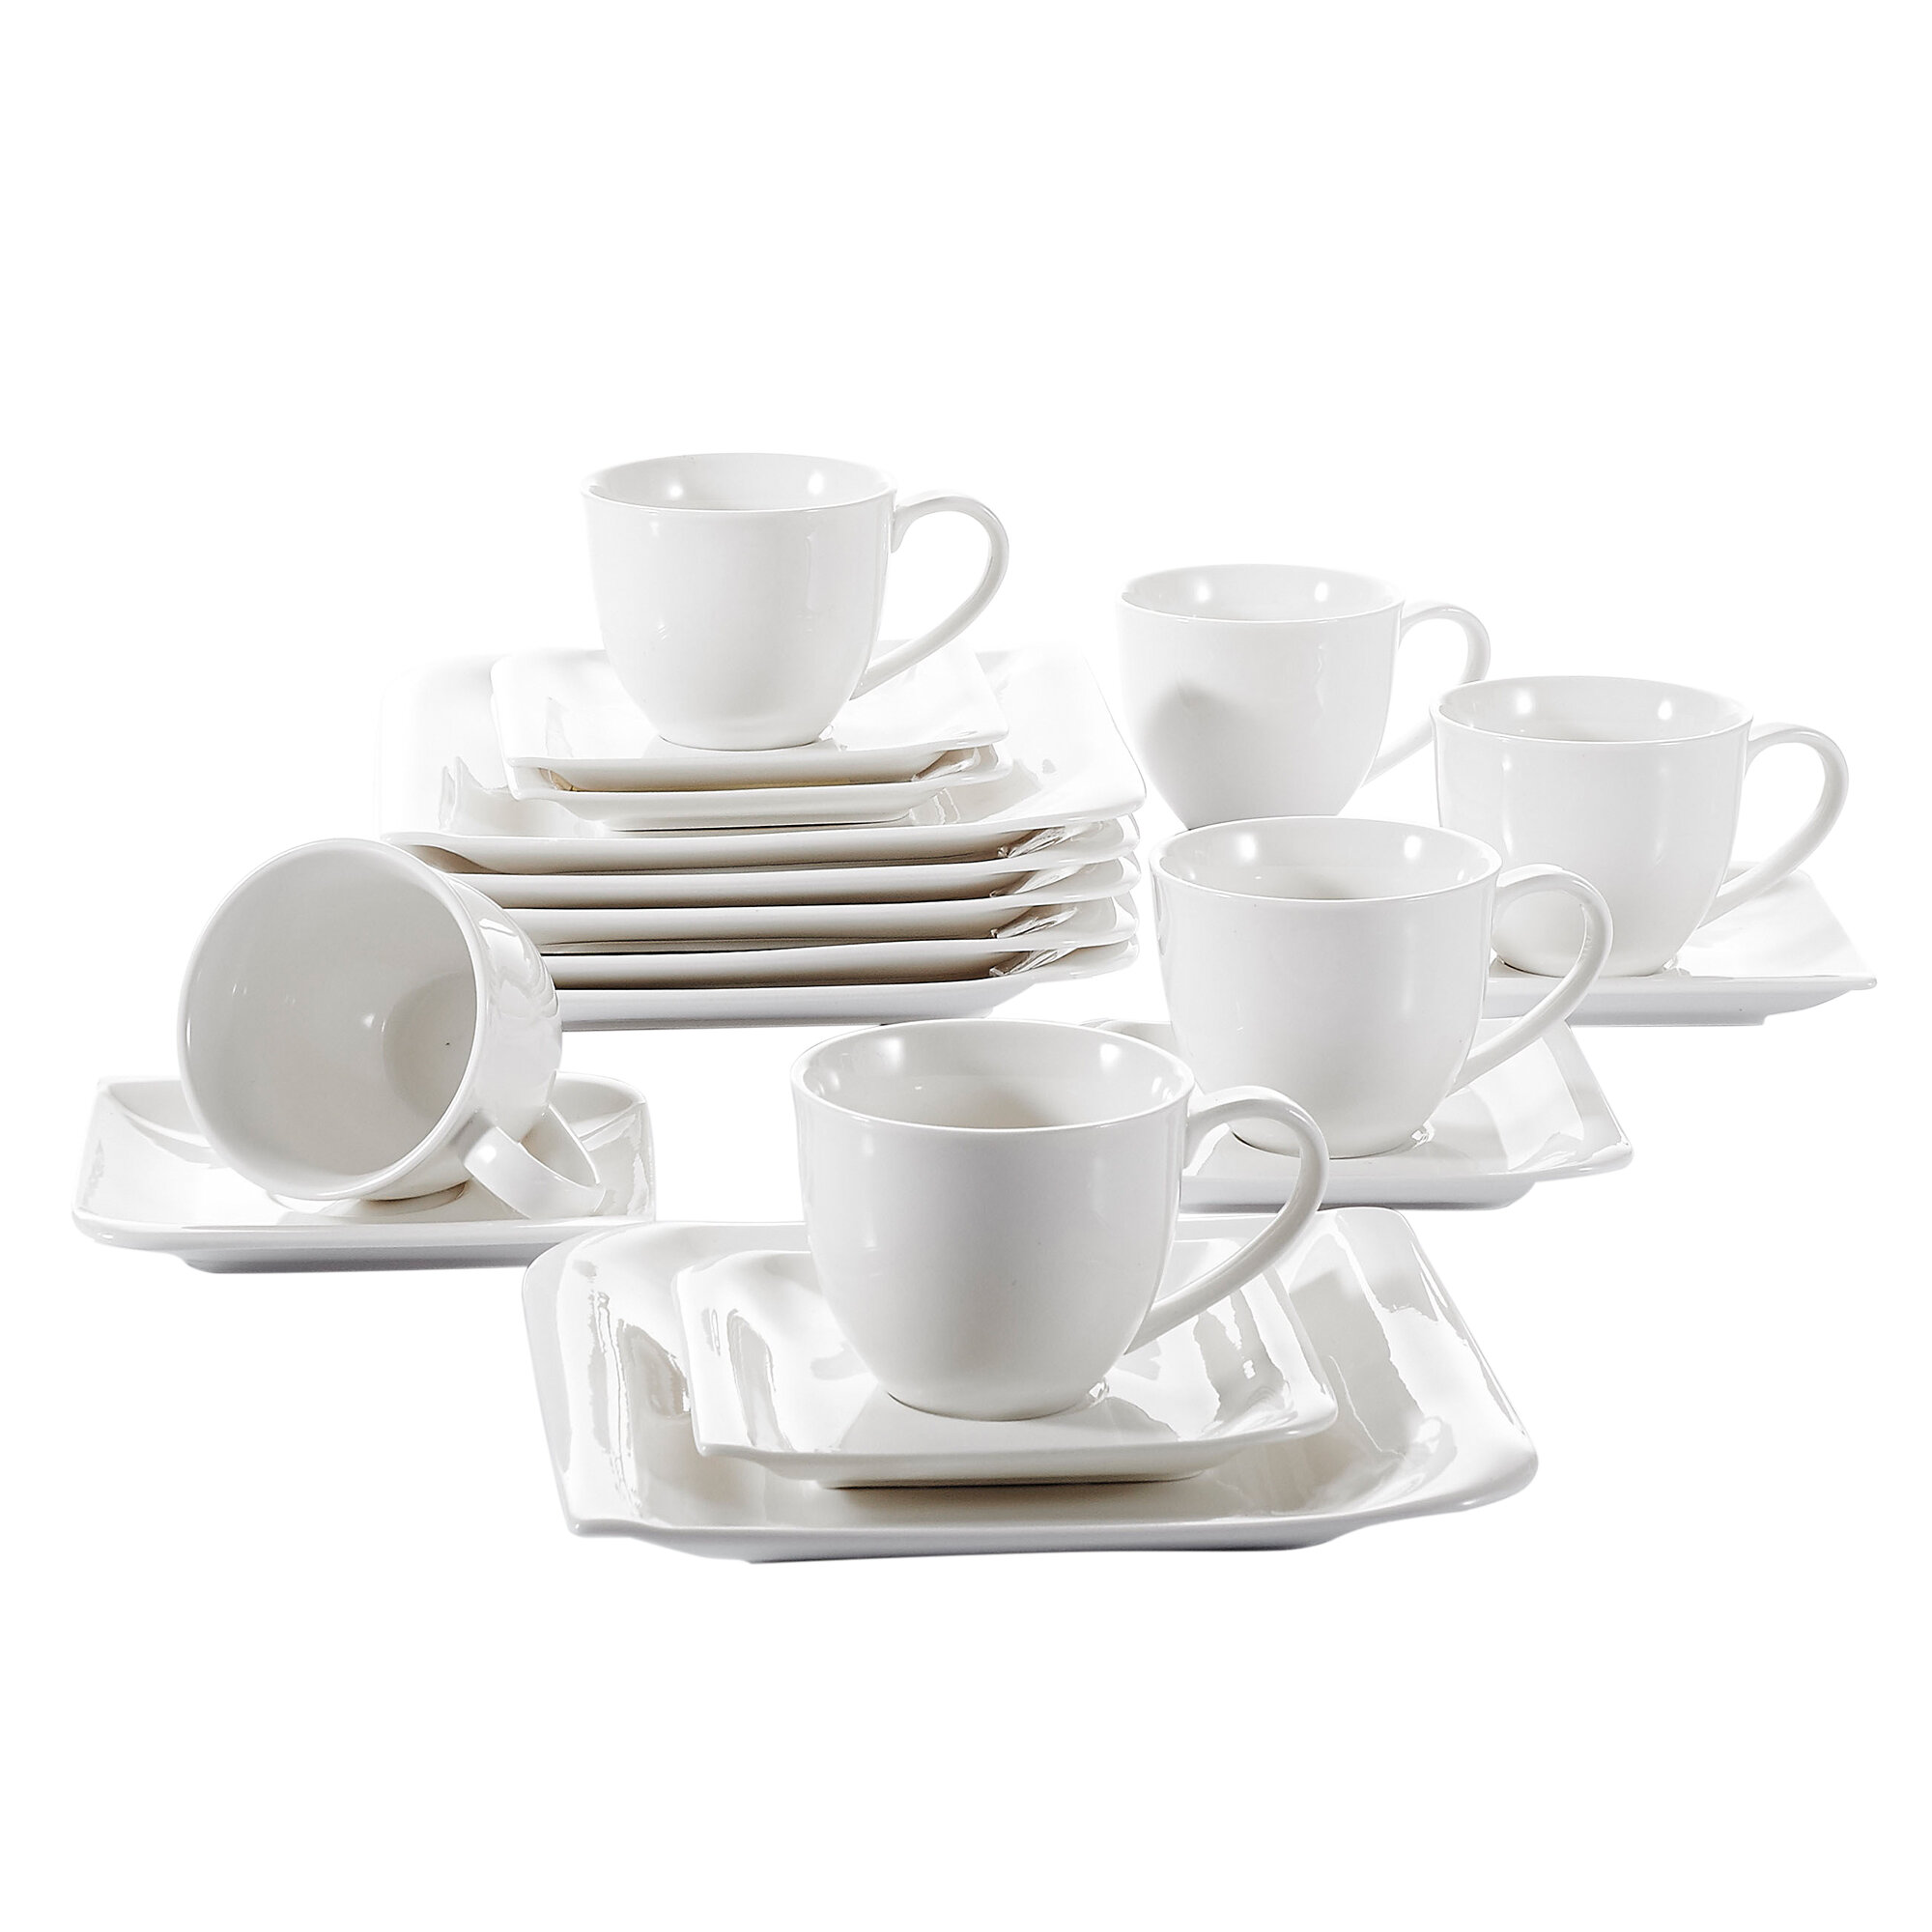 vancasso Series Cloris 6-Piece Cereal Bowls 5.5 in. Ivory White